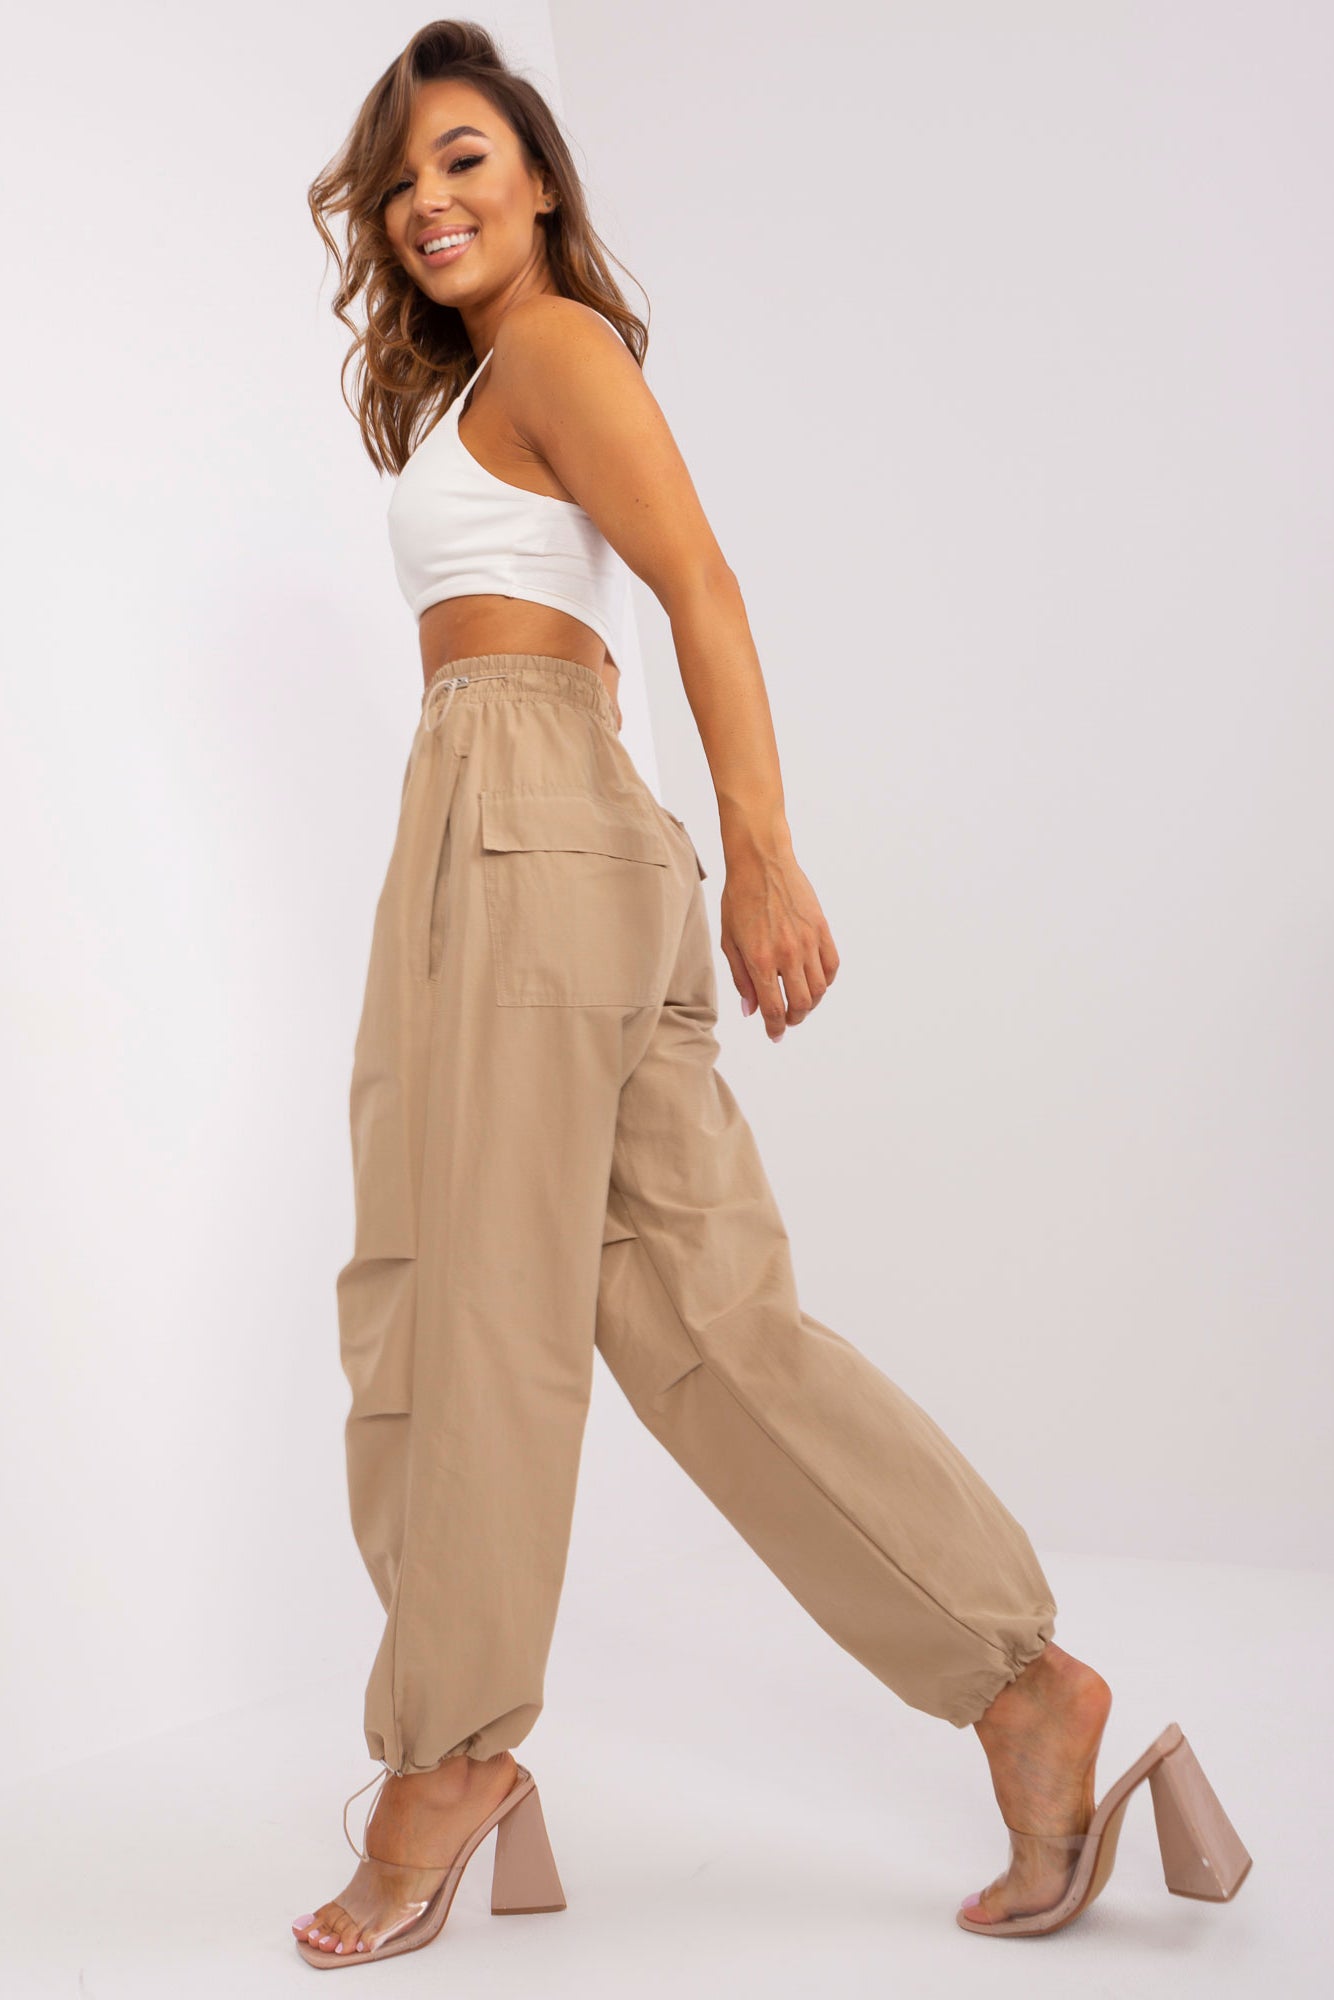 Fashion Ladies Maroon High Waist Body Shaping Jeans Trousers @ Best Price  Online | Jumia Kenya